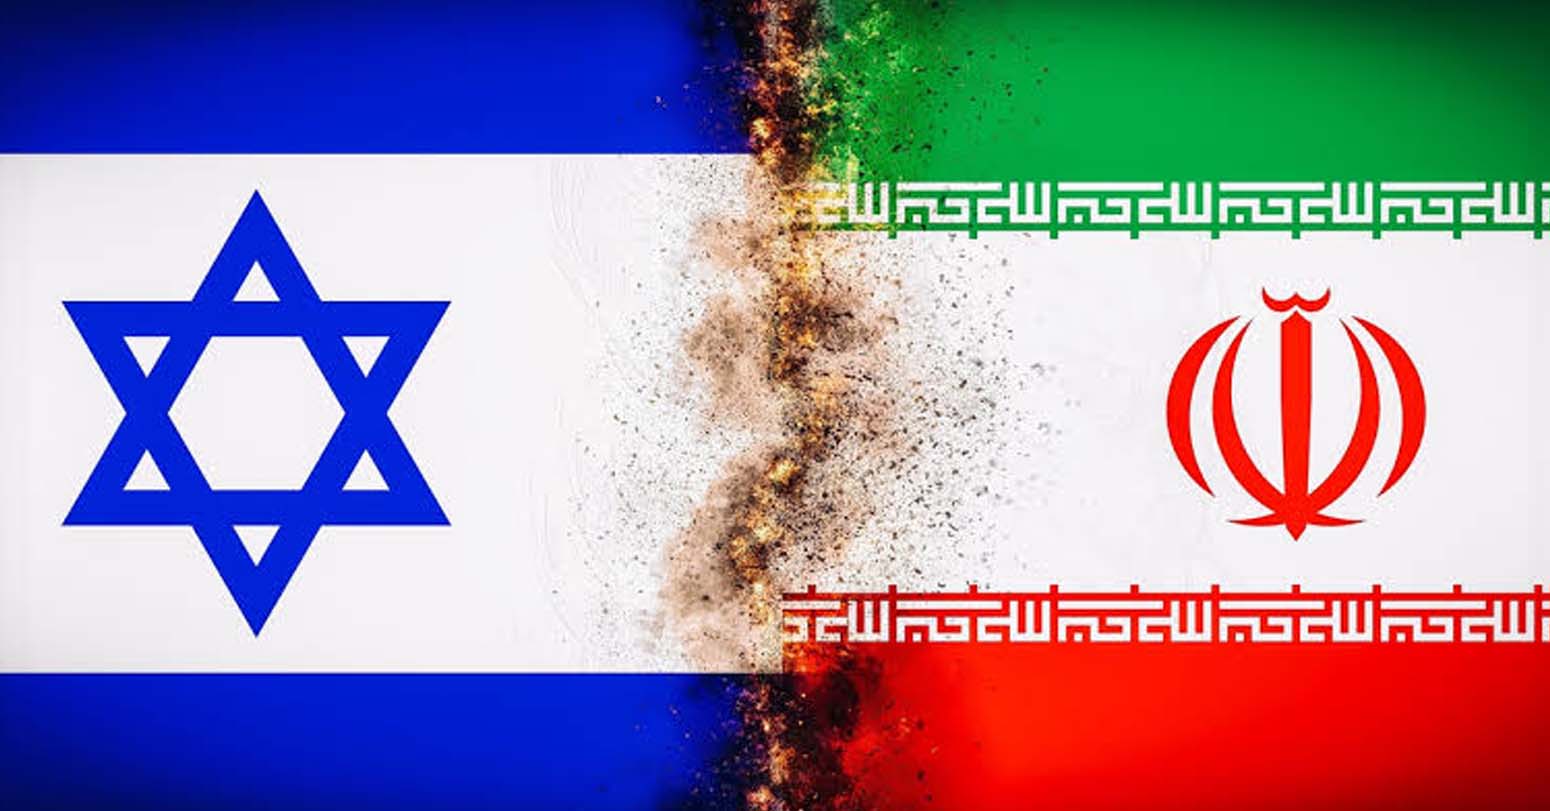 The Shadow War Between Iran And Israel Has Been Exposed. What Happens Next?